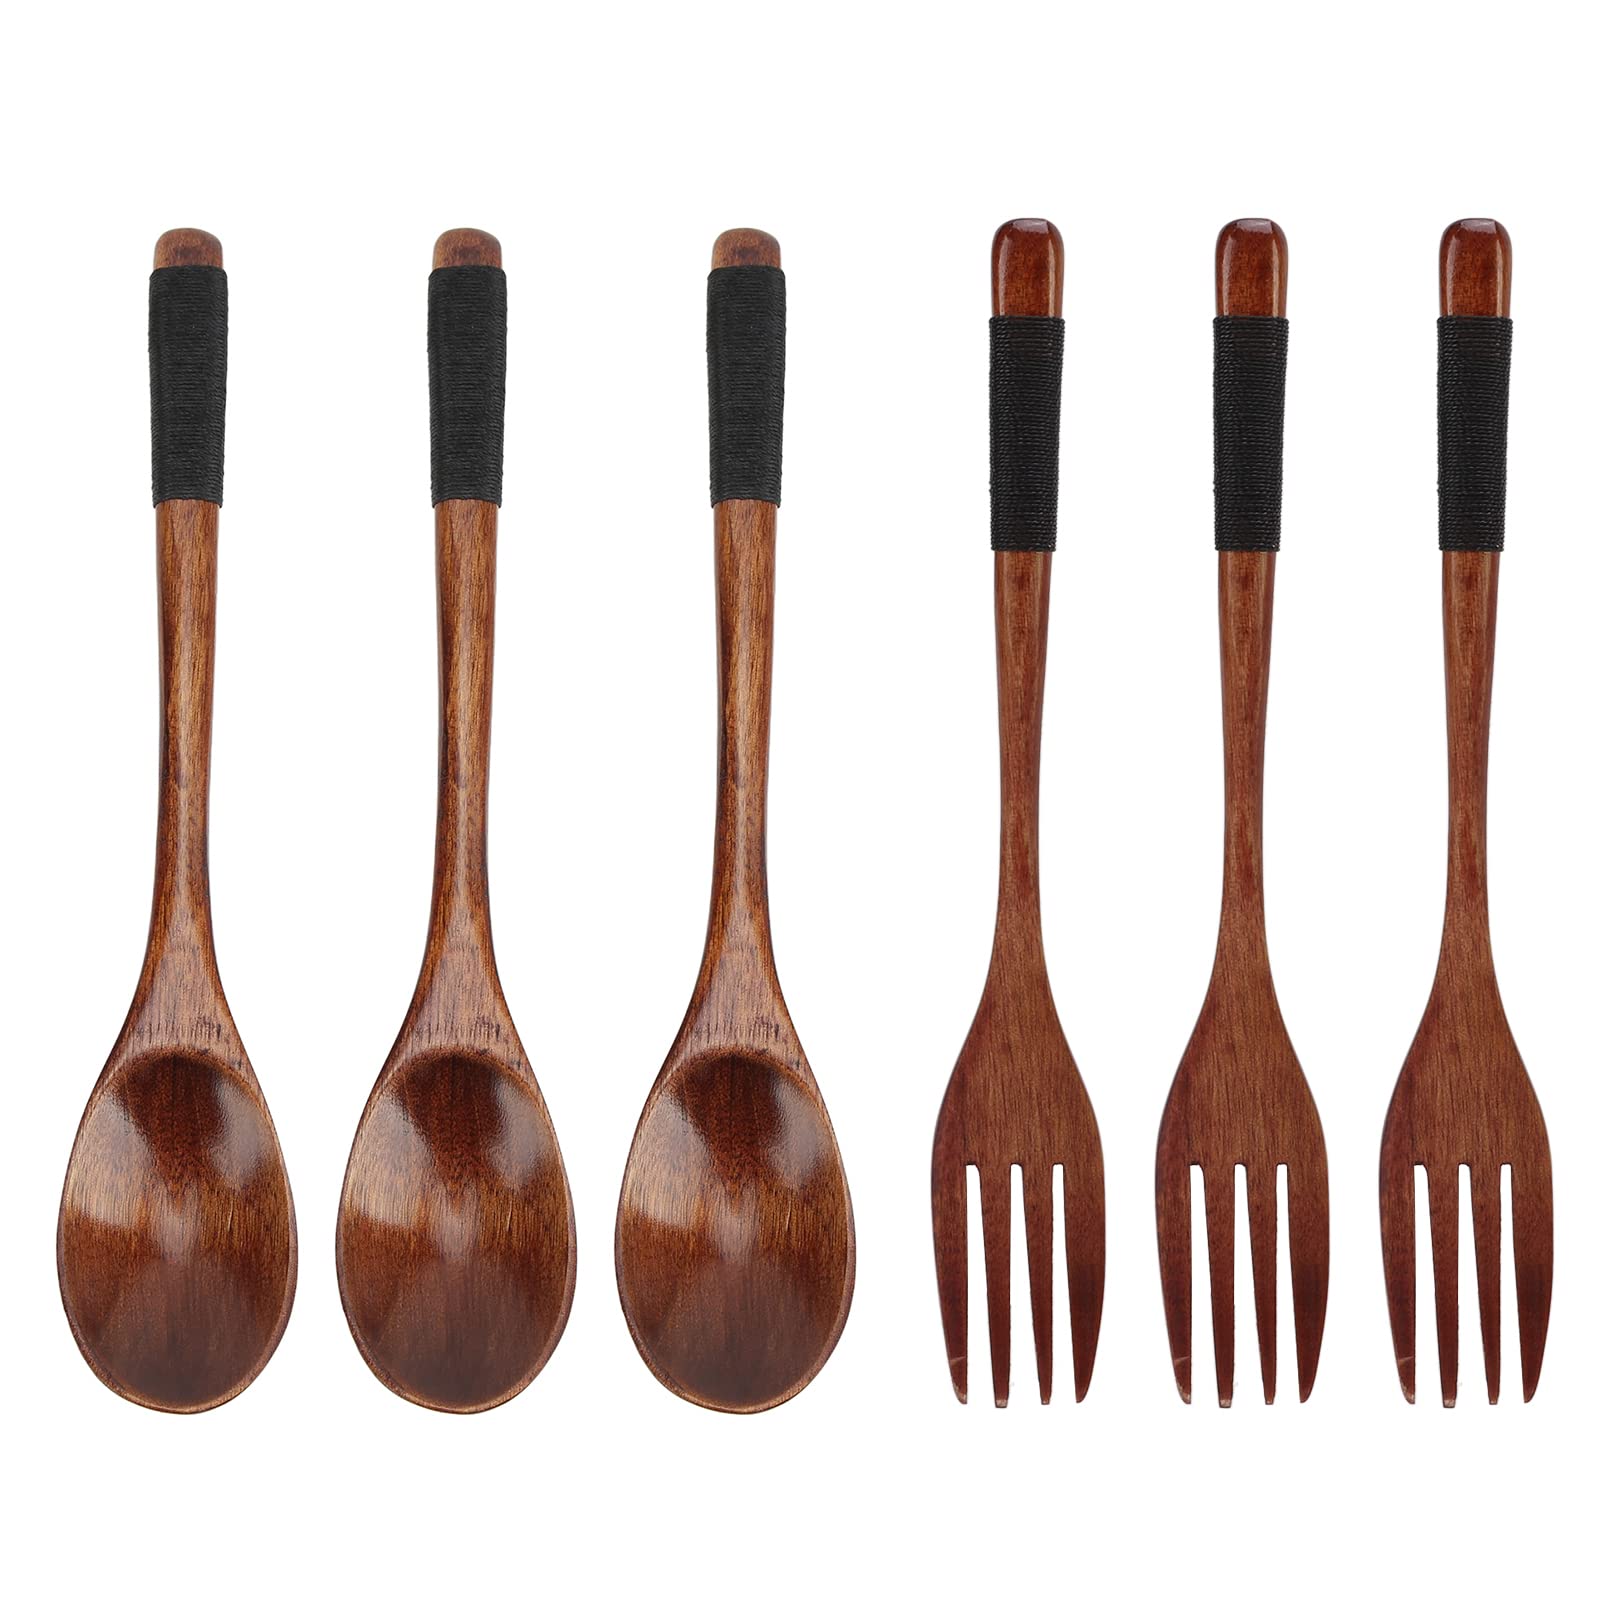 6pcs Spoons and Forks Set, Reusable Wooden Forks and Spoons for Eating 8.9in Japanese Wooden Utensil Set Natural Wood Cutlery